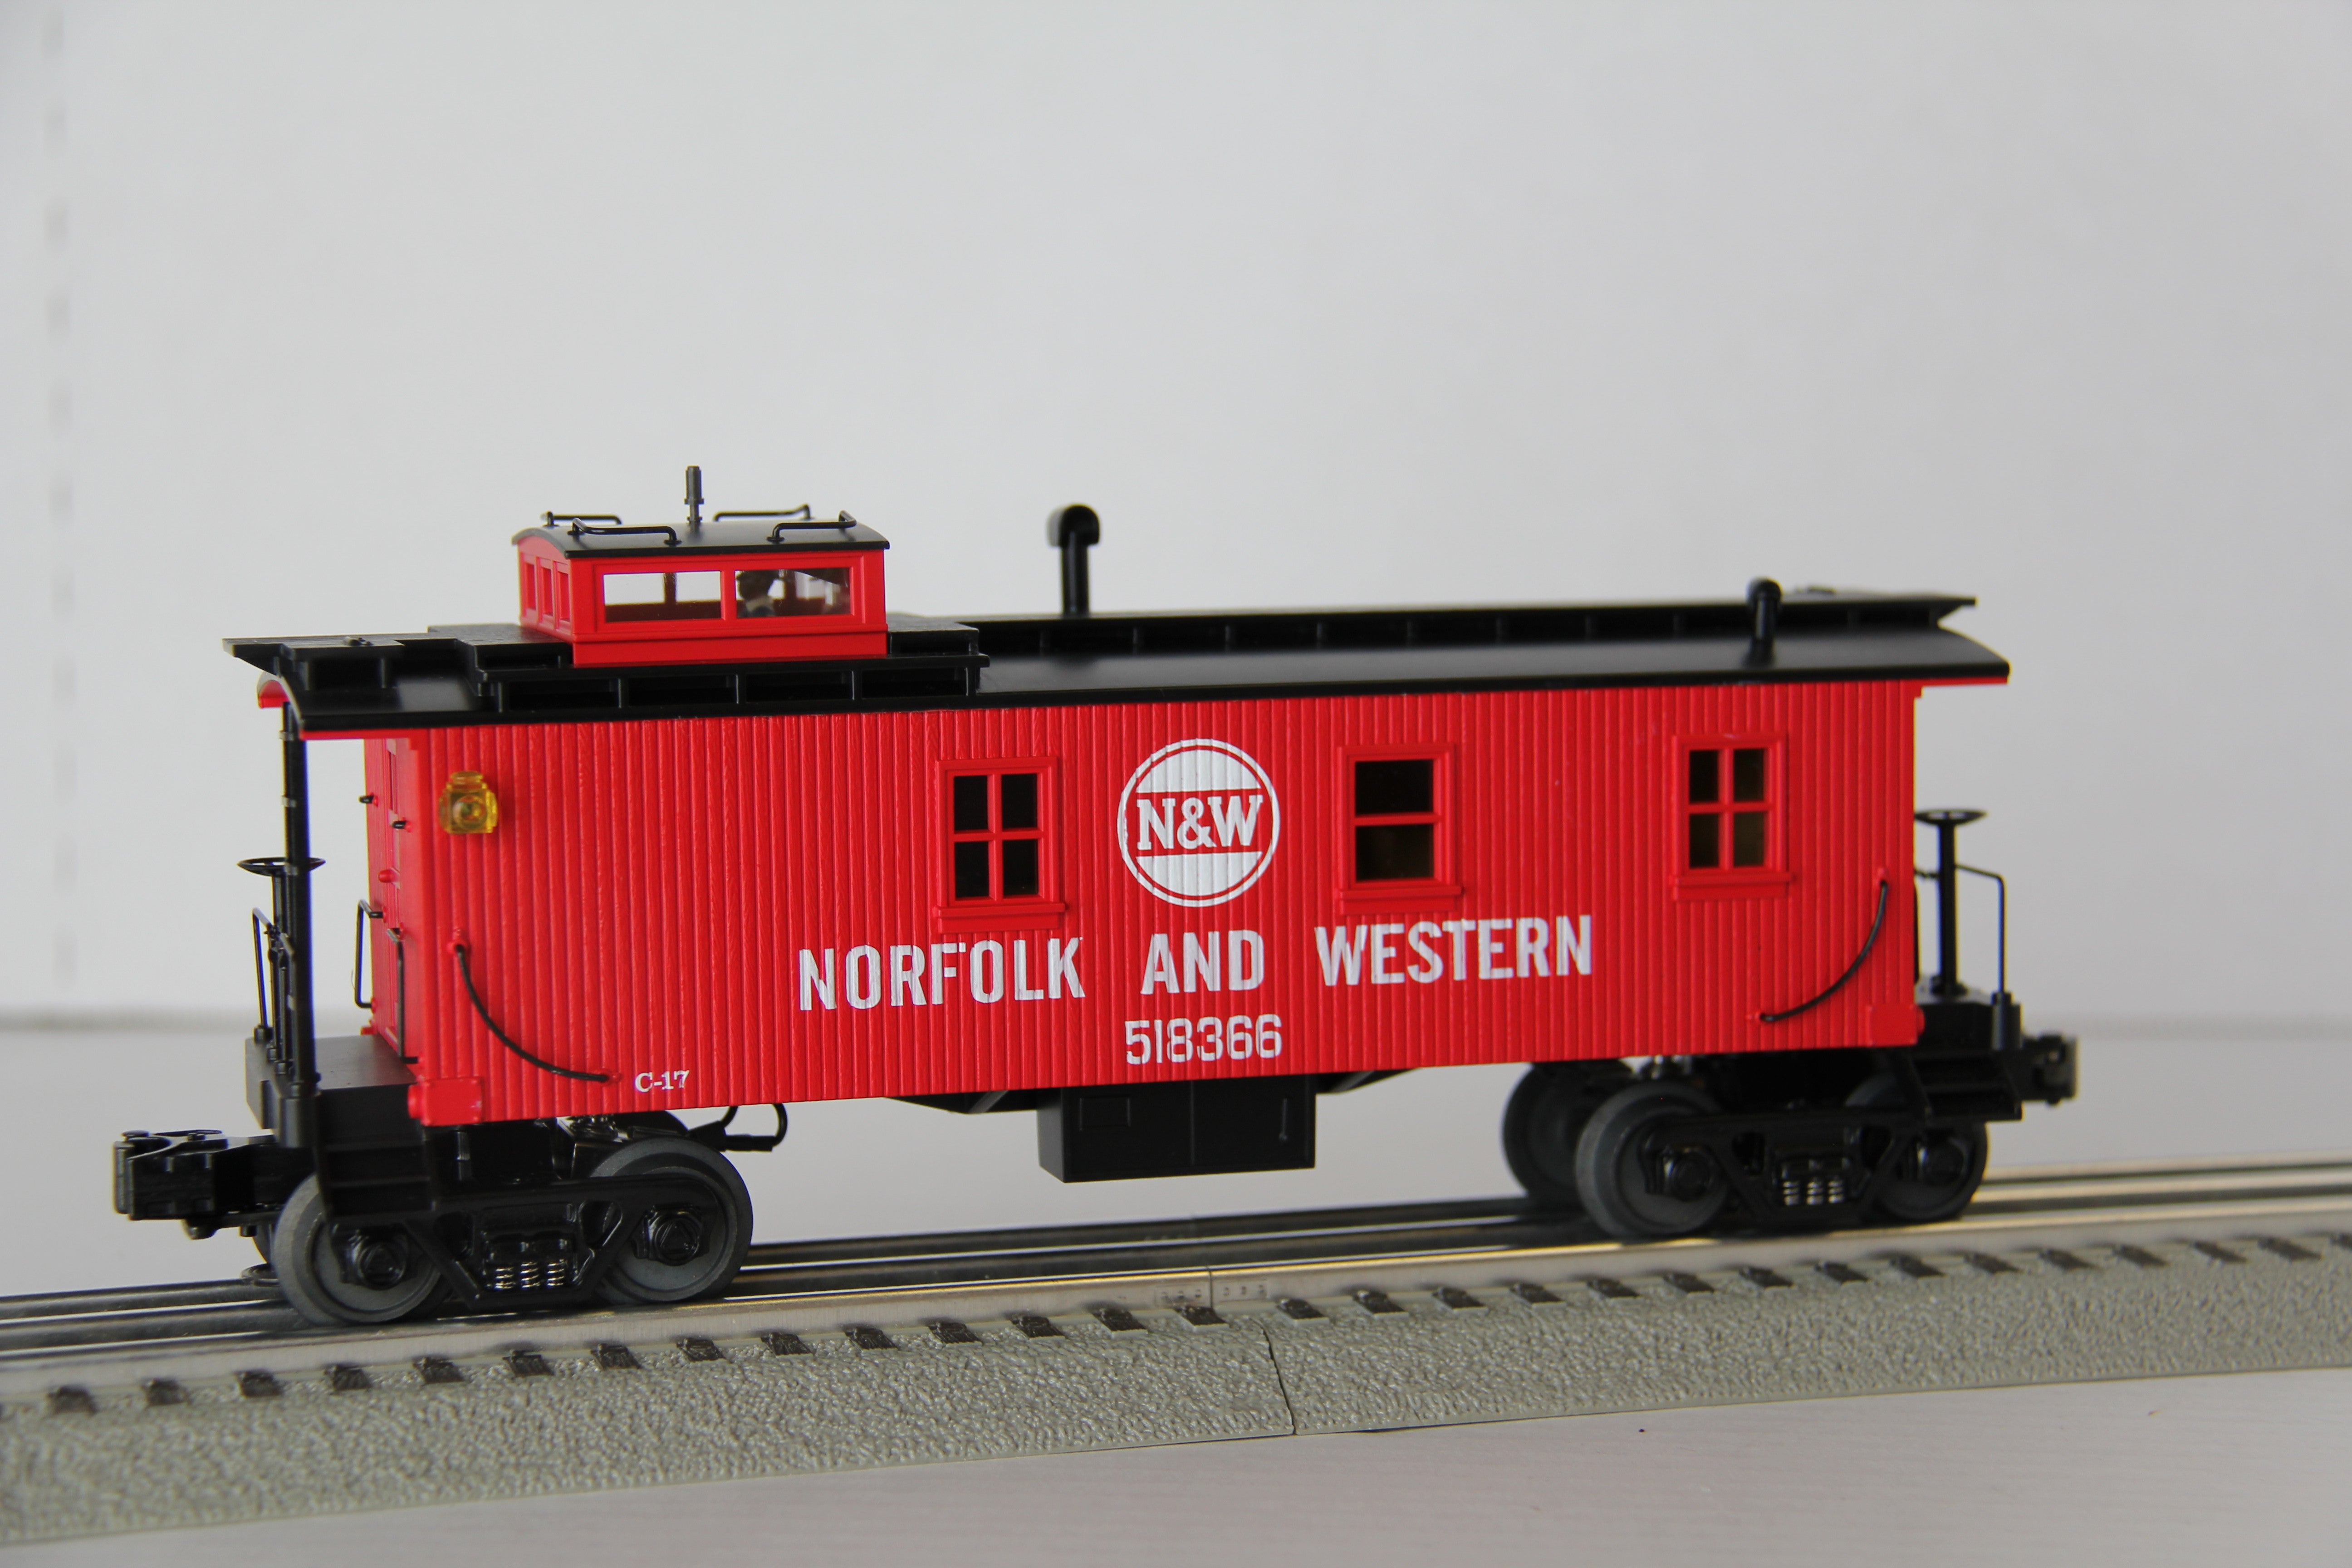 Rail King 30-7736 Norfolk & Western Woodsided Caboose-Second hand-M3823